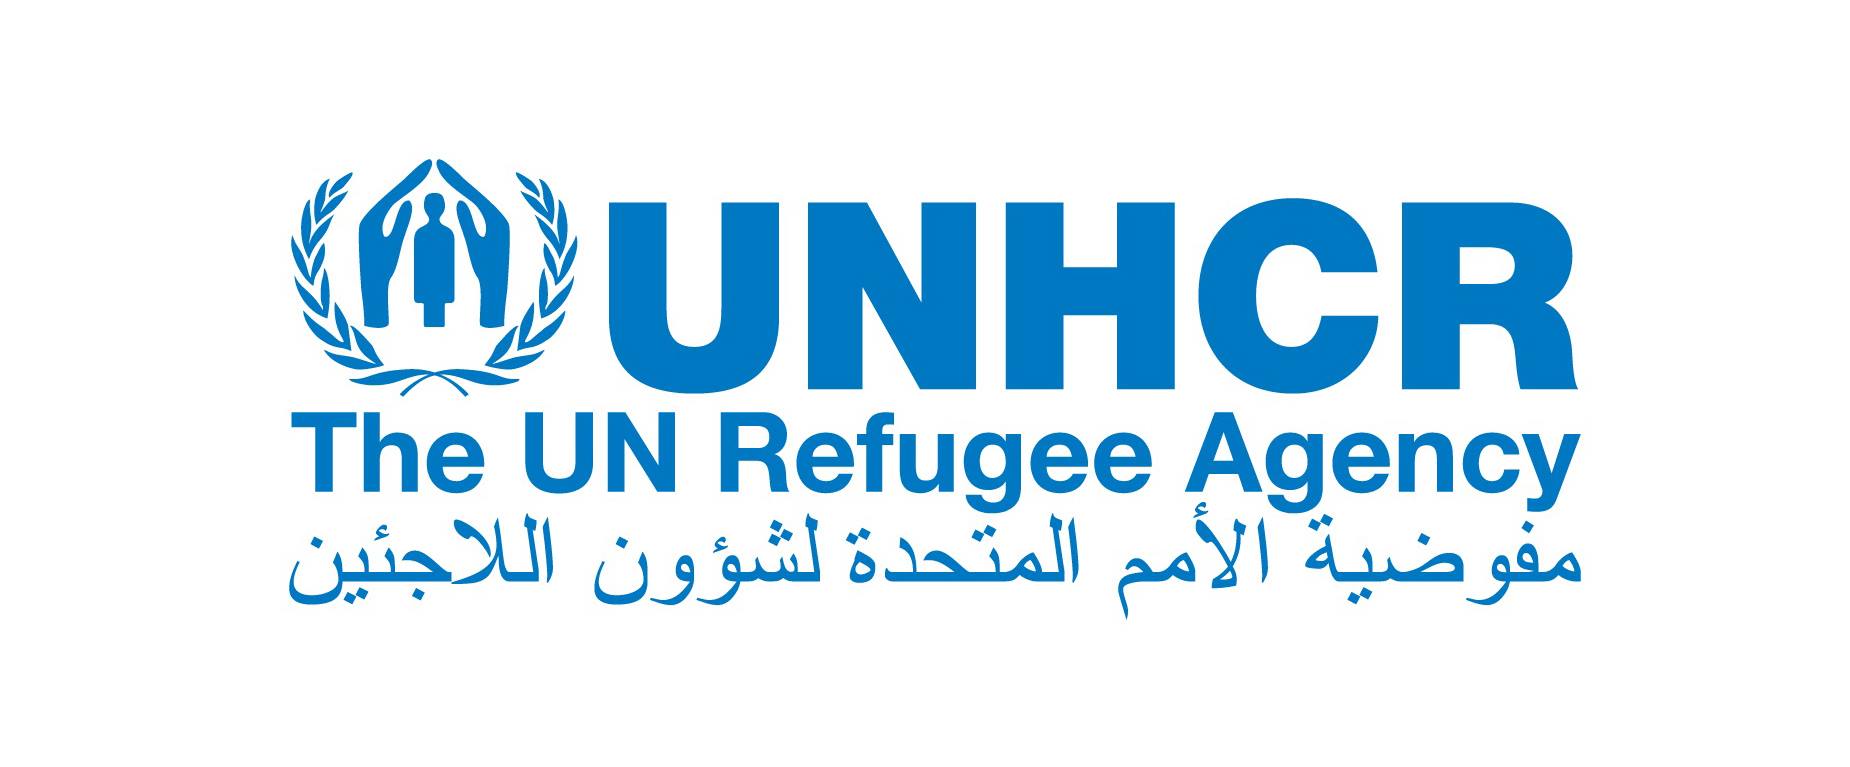 UNHCR Logo - 2017 UNHCR Call for Expression of Interest in the Governorate of ...